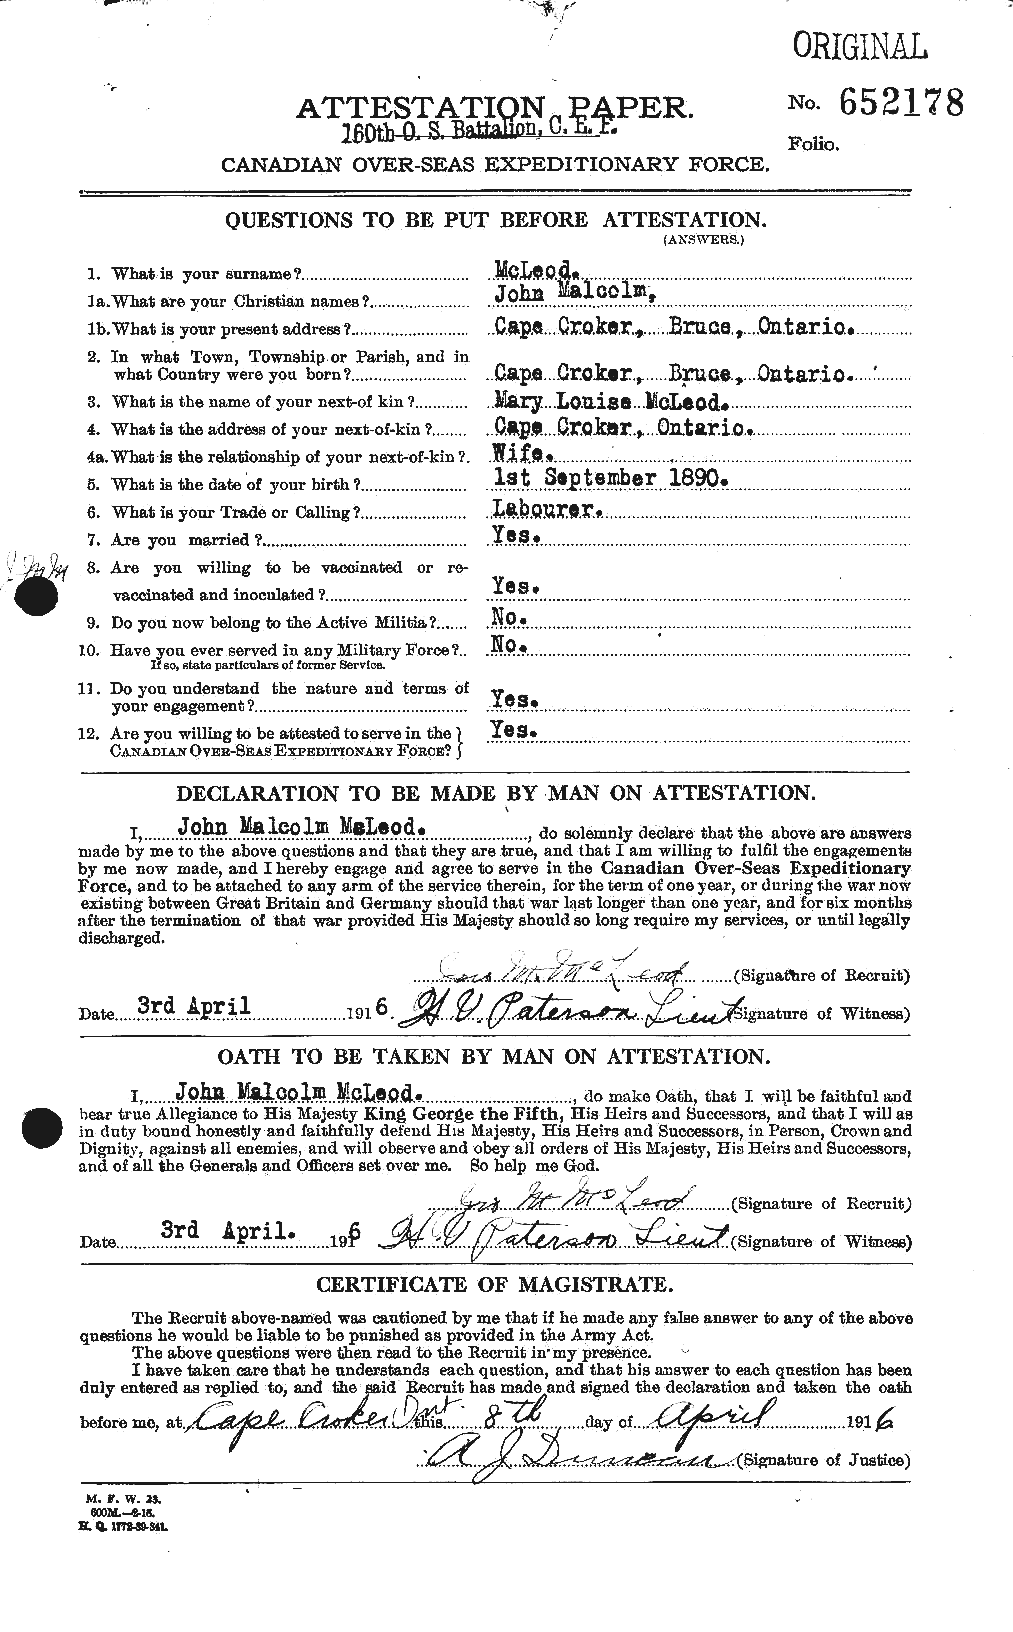 Personnel Records of the First World War - CEF 535028a